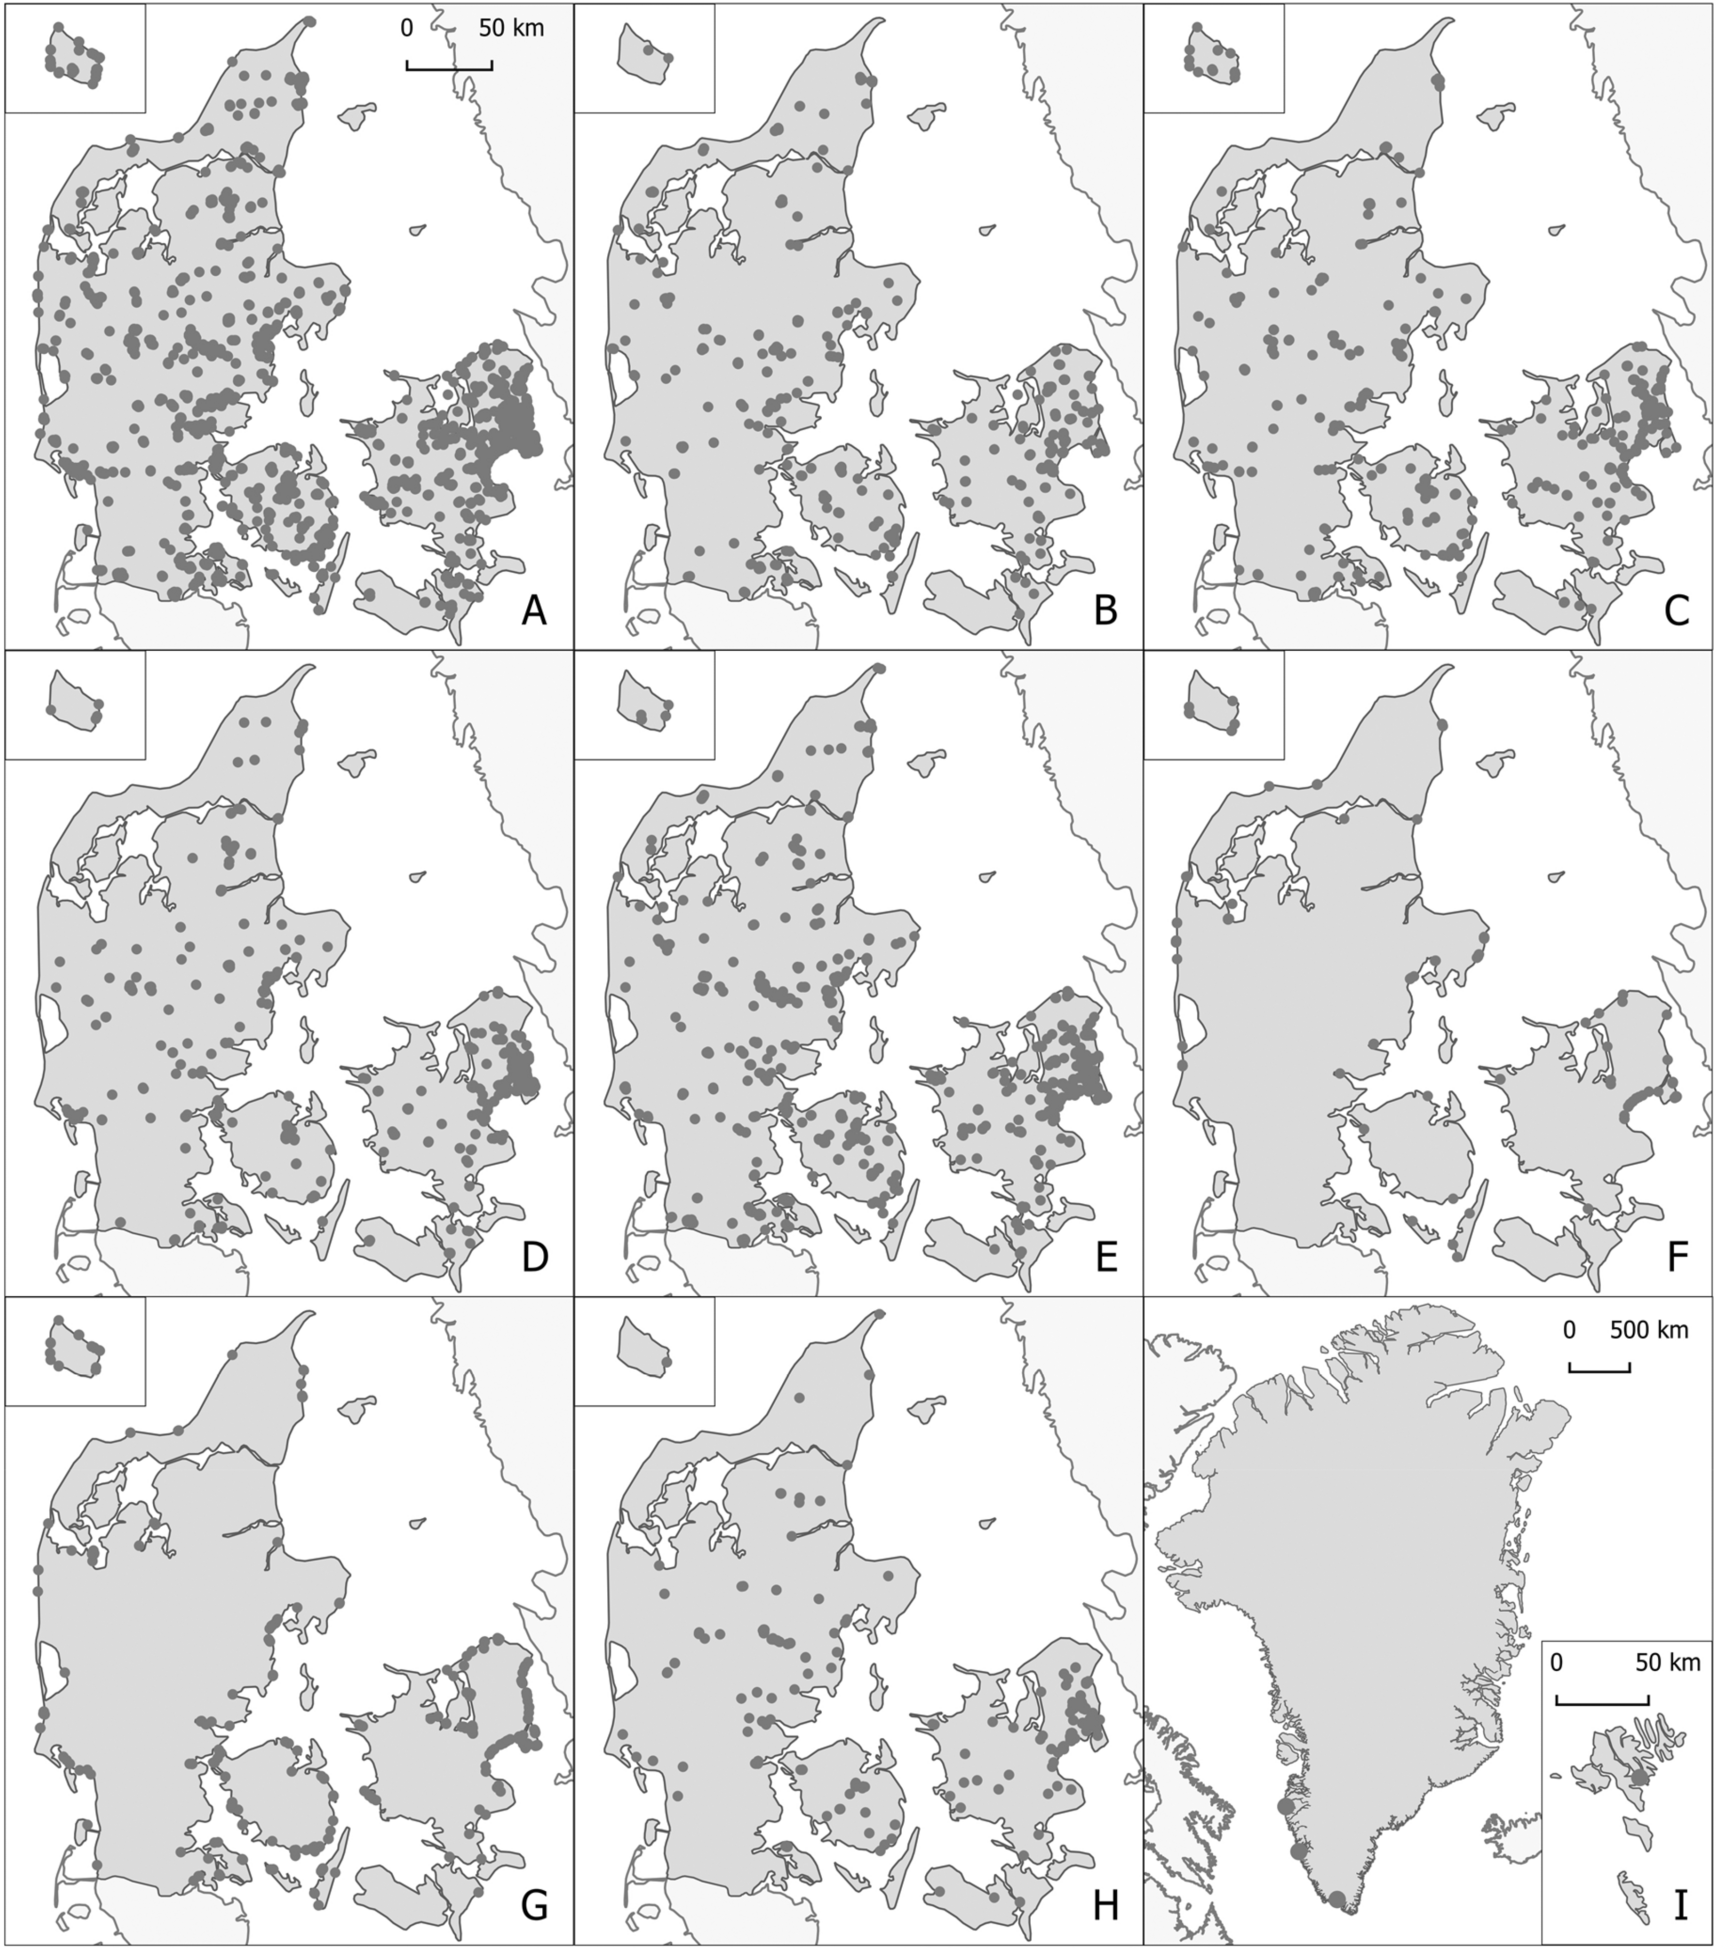 A nationwide assessment of plastic pollution in the Danish realm using  citizen science | Scientific Reports